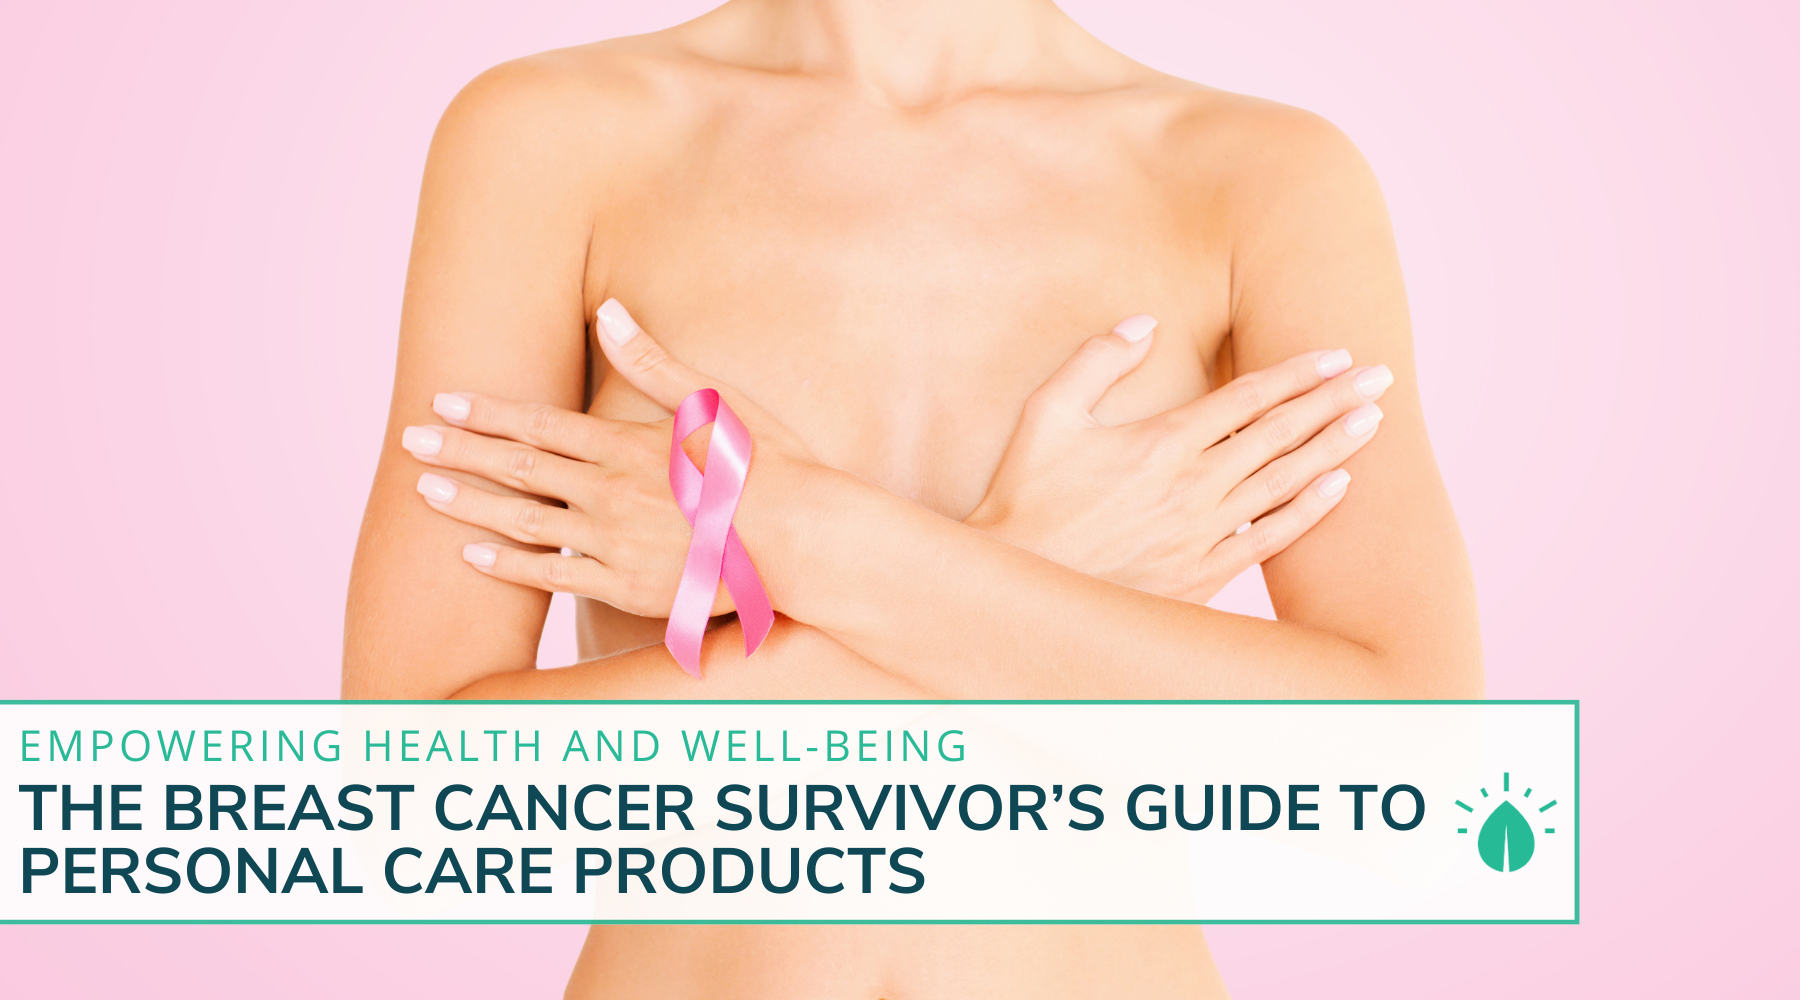 The Breast Cancer Survivor's Guide To Personal Care Products